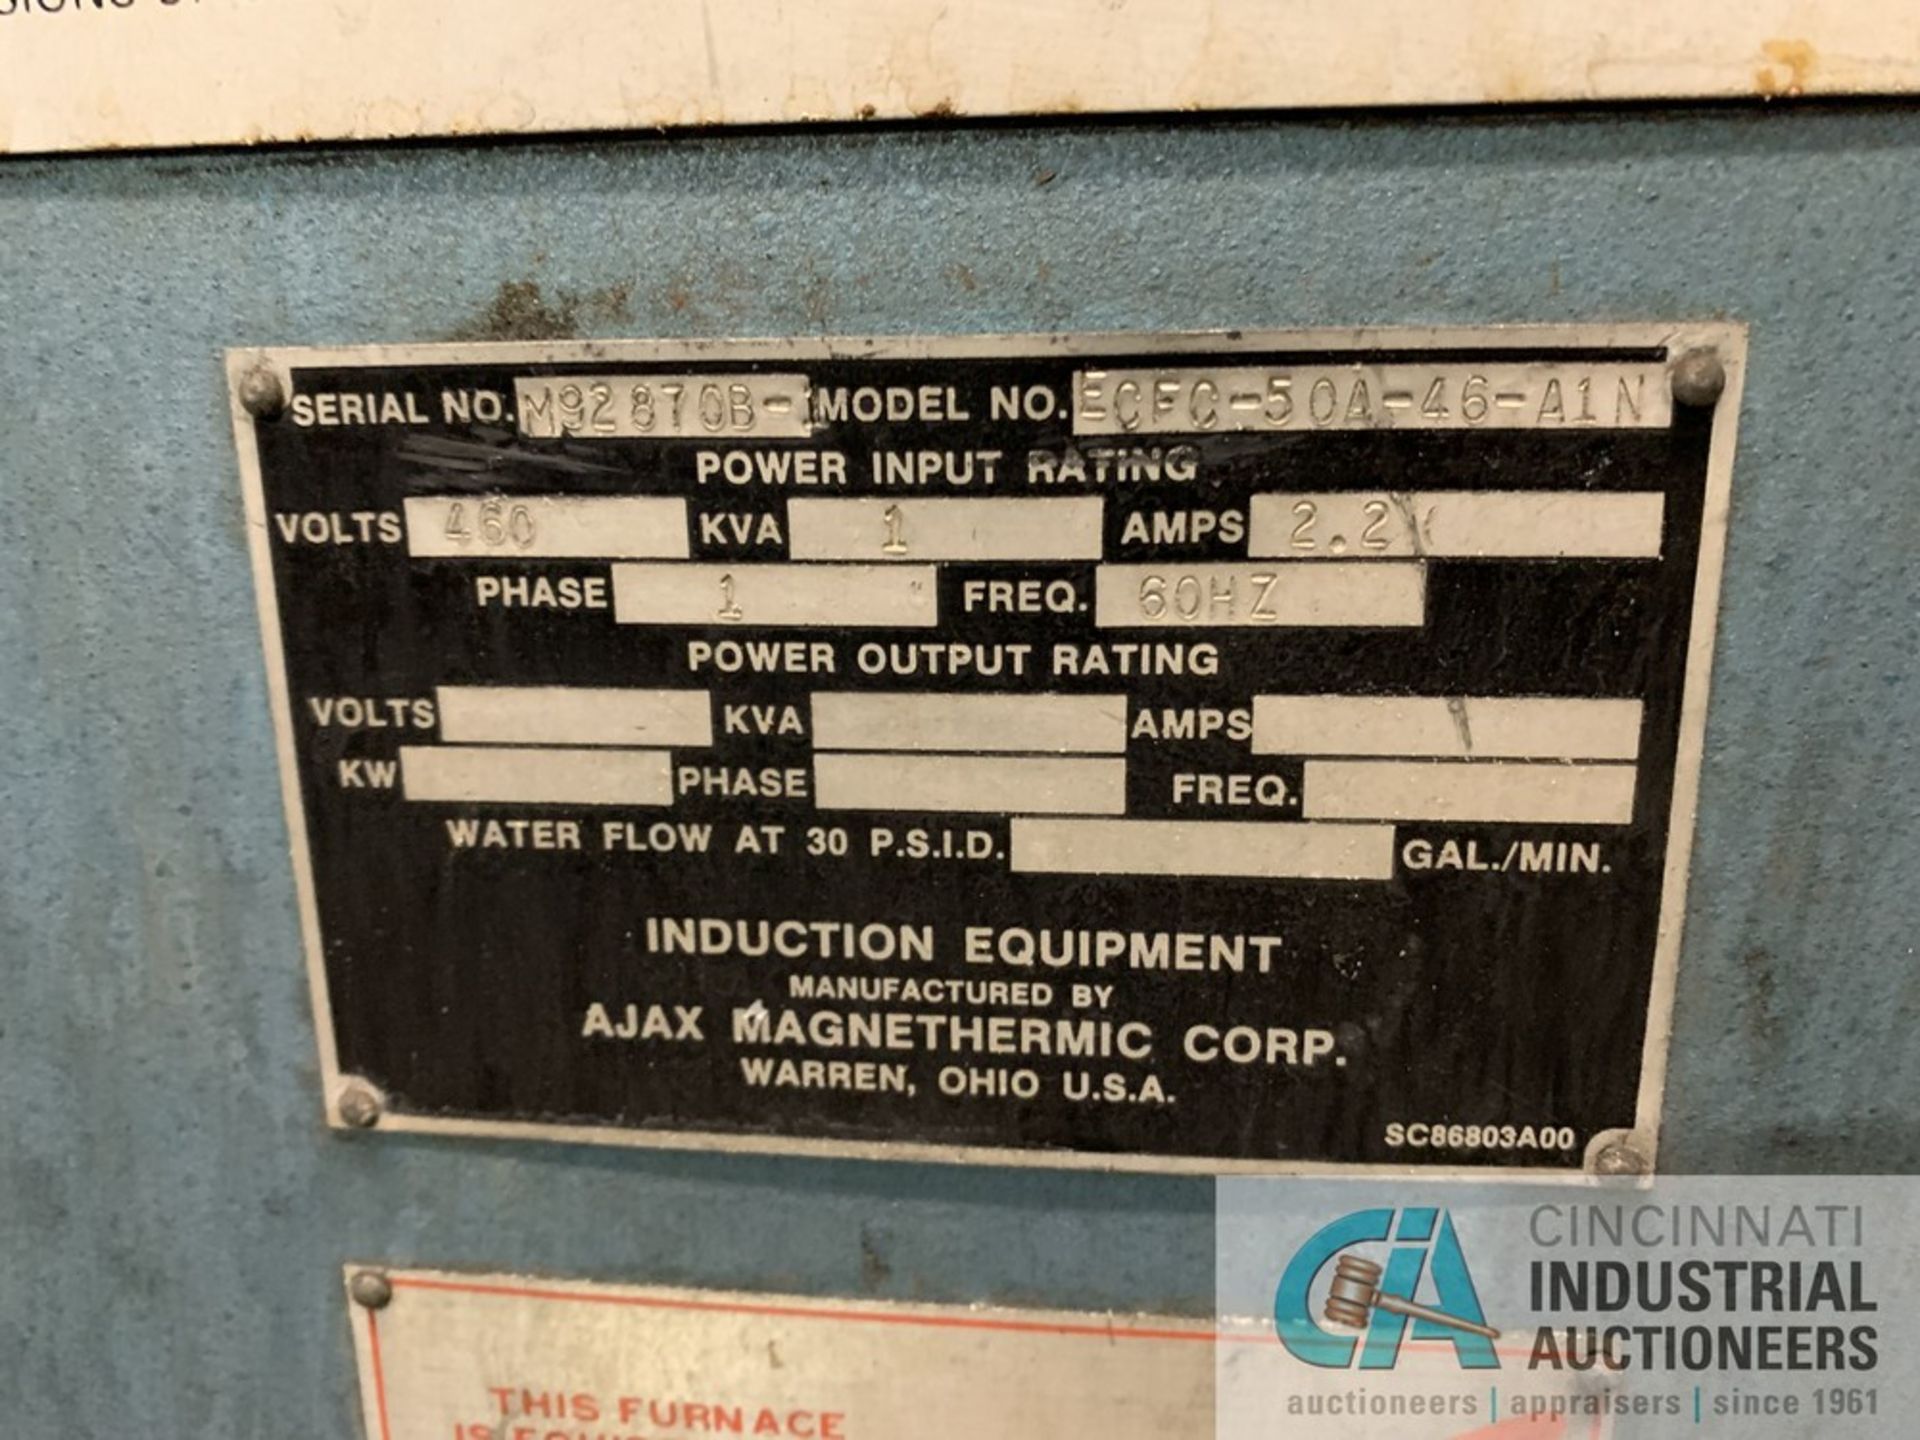 500 KW AJAX MAGNATHERMIC POWER SUPPLY AND CONTROL; 575V, 1,000 KVA, 1,750 AMP, 500 KW, CONTROL PANEL - Image 14 of 14